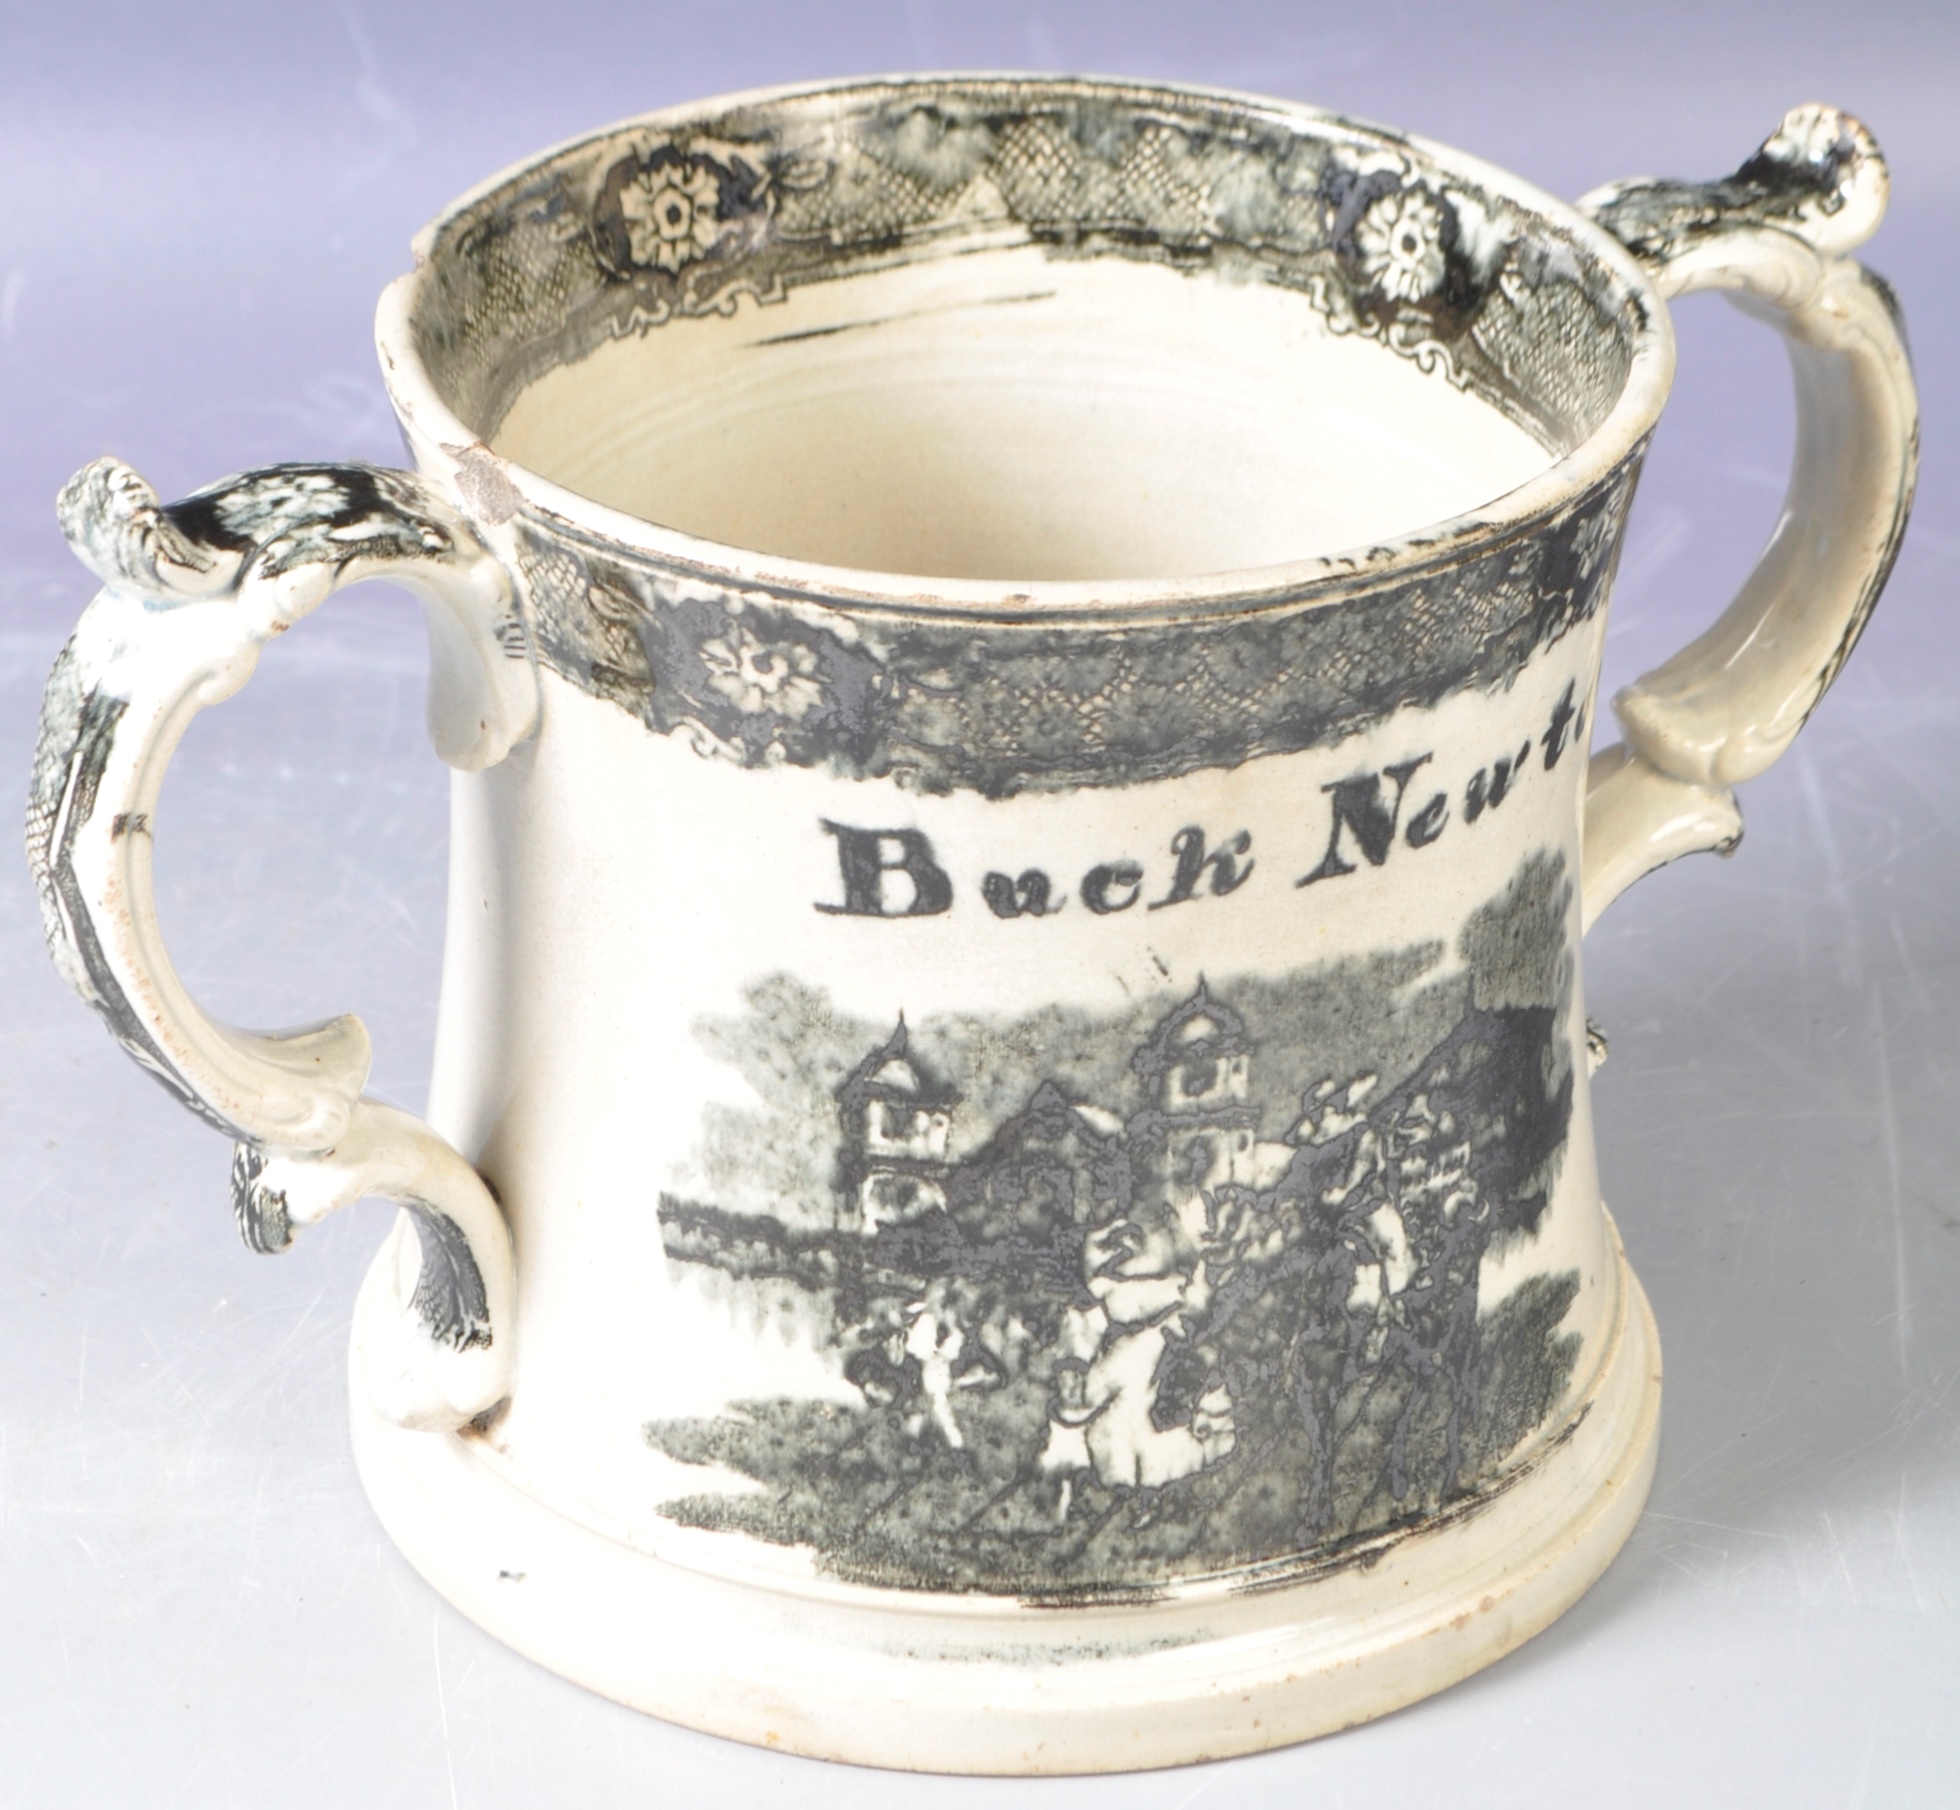 ANTIQUE BLACK AND WHITE TRANSFER STAFFORDSHIRE LOVING CUP - Image 4 of 7